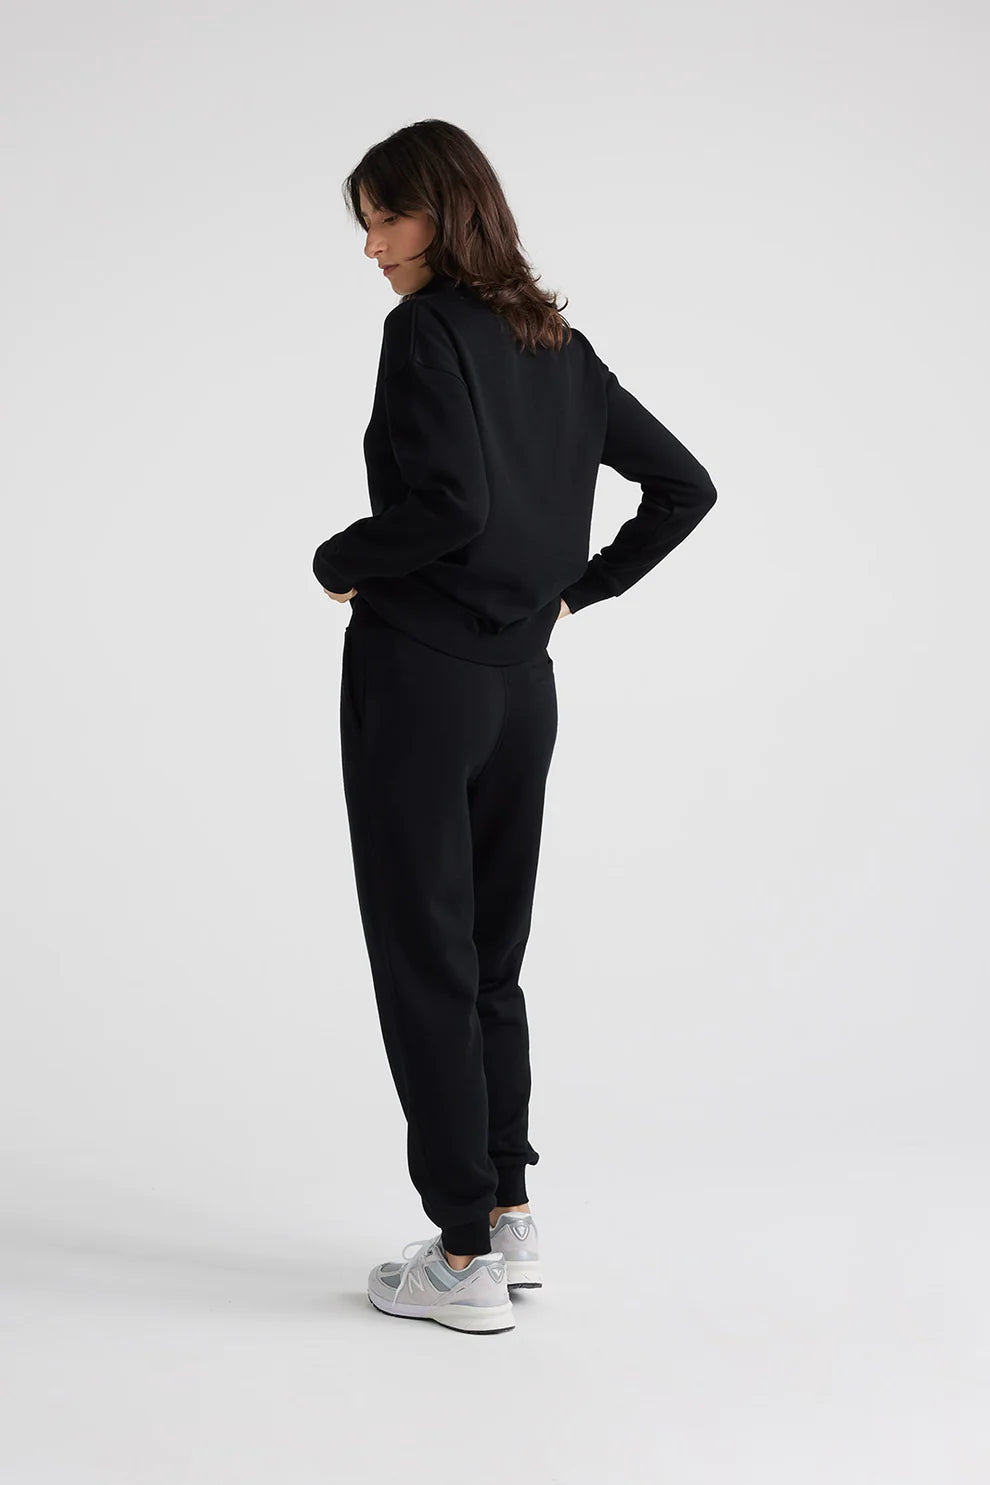 "Upgrade your look with our black Merino wool zip sweater. Exceptional comfort, impeccable style.